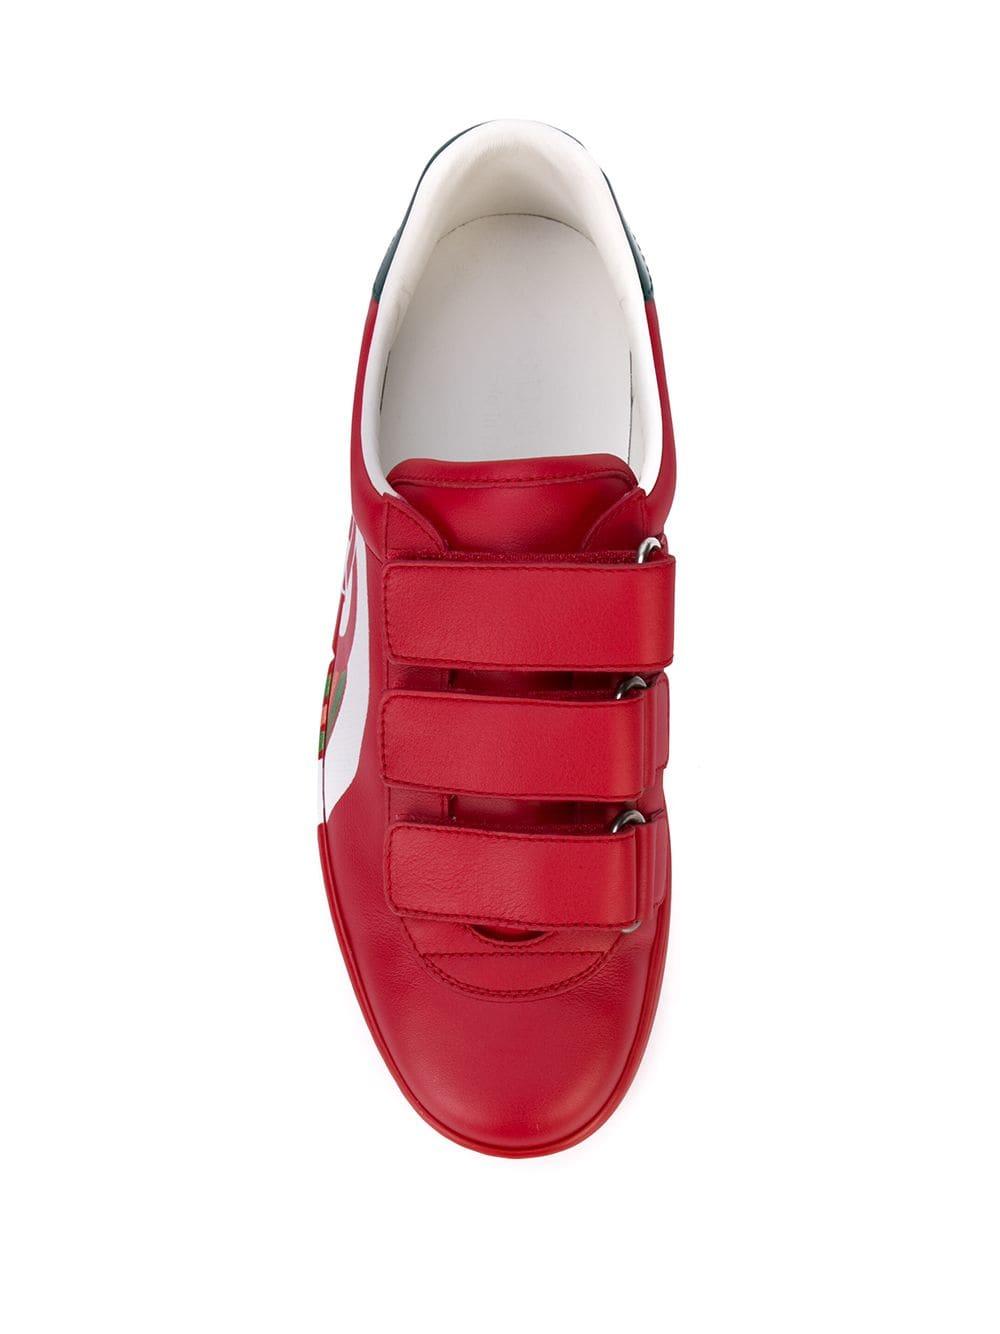 G blæk Astrolabe Gucci Leather Rainbow Sneakers in Red for Men - Lyst